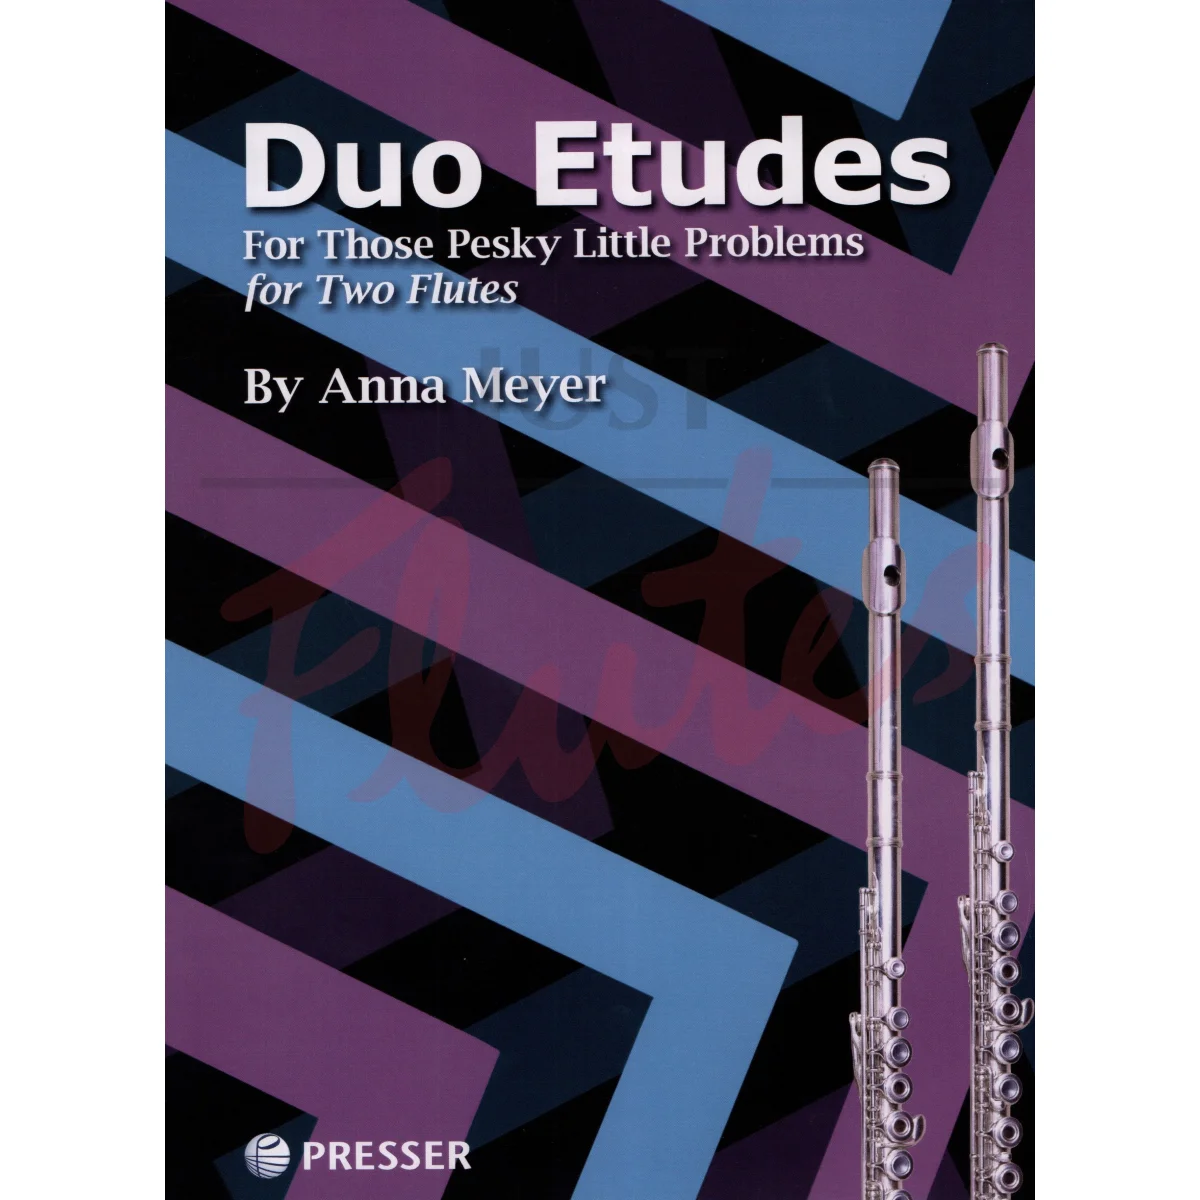 Duo Etudes for those Pesky Little Problems for Two Flutes